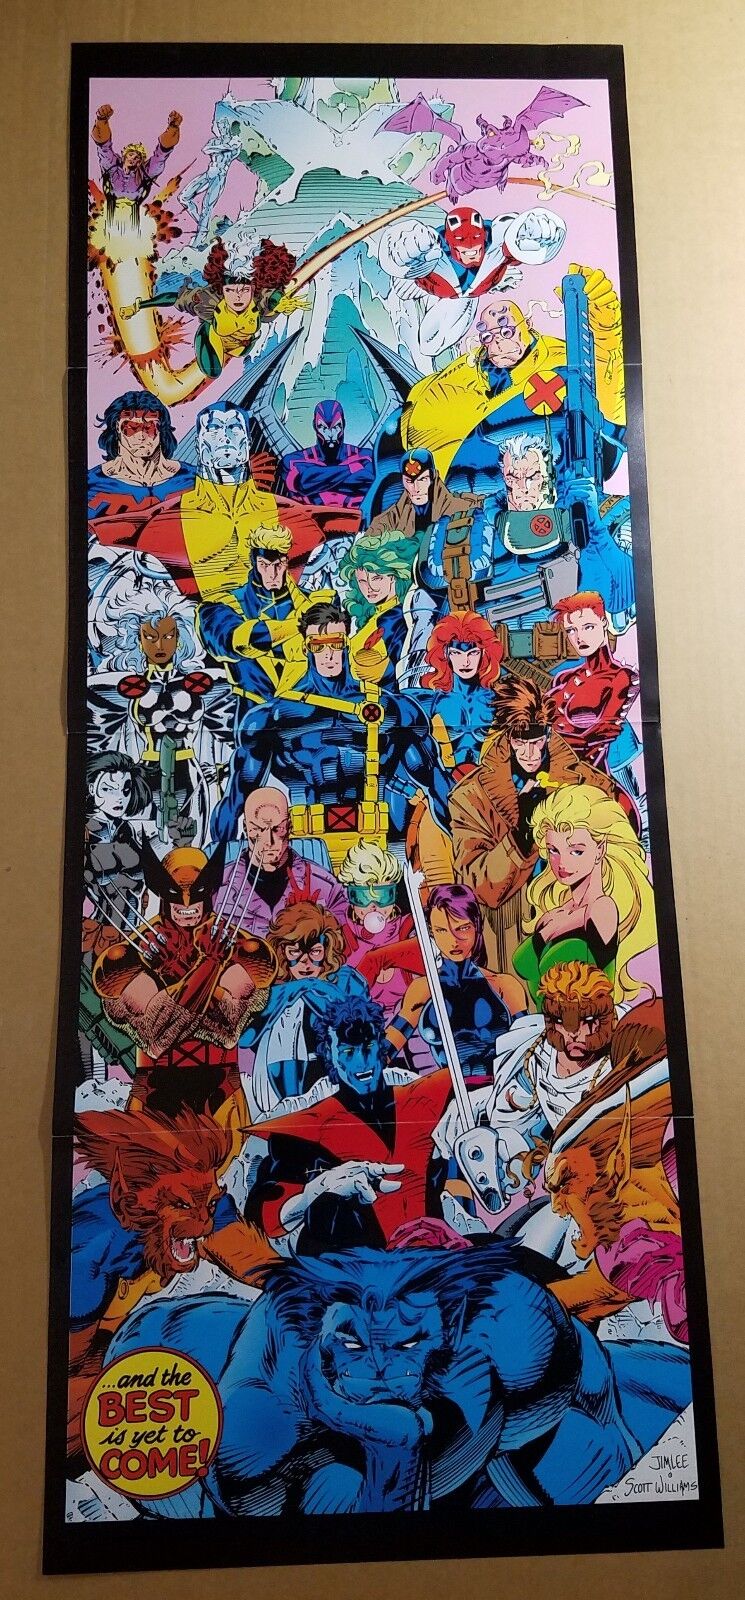 X-Men Wolverine Gambit Rogue Psylocke Storm Cable Marvel Comic Poster by Jim Lee